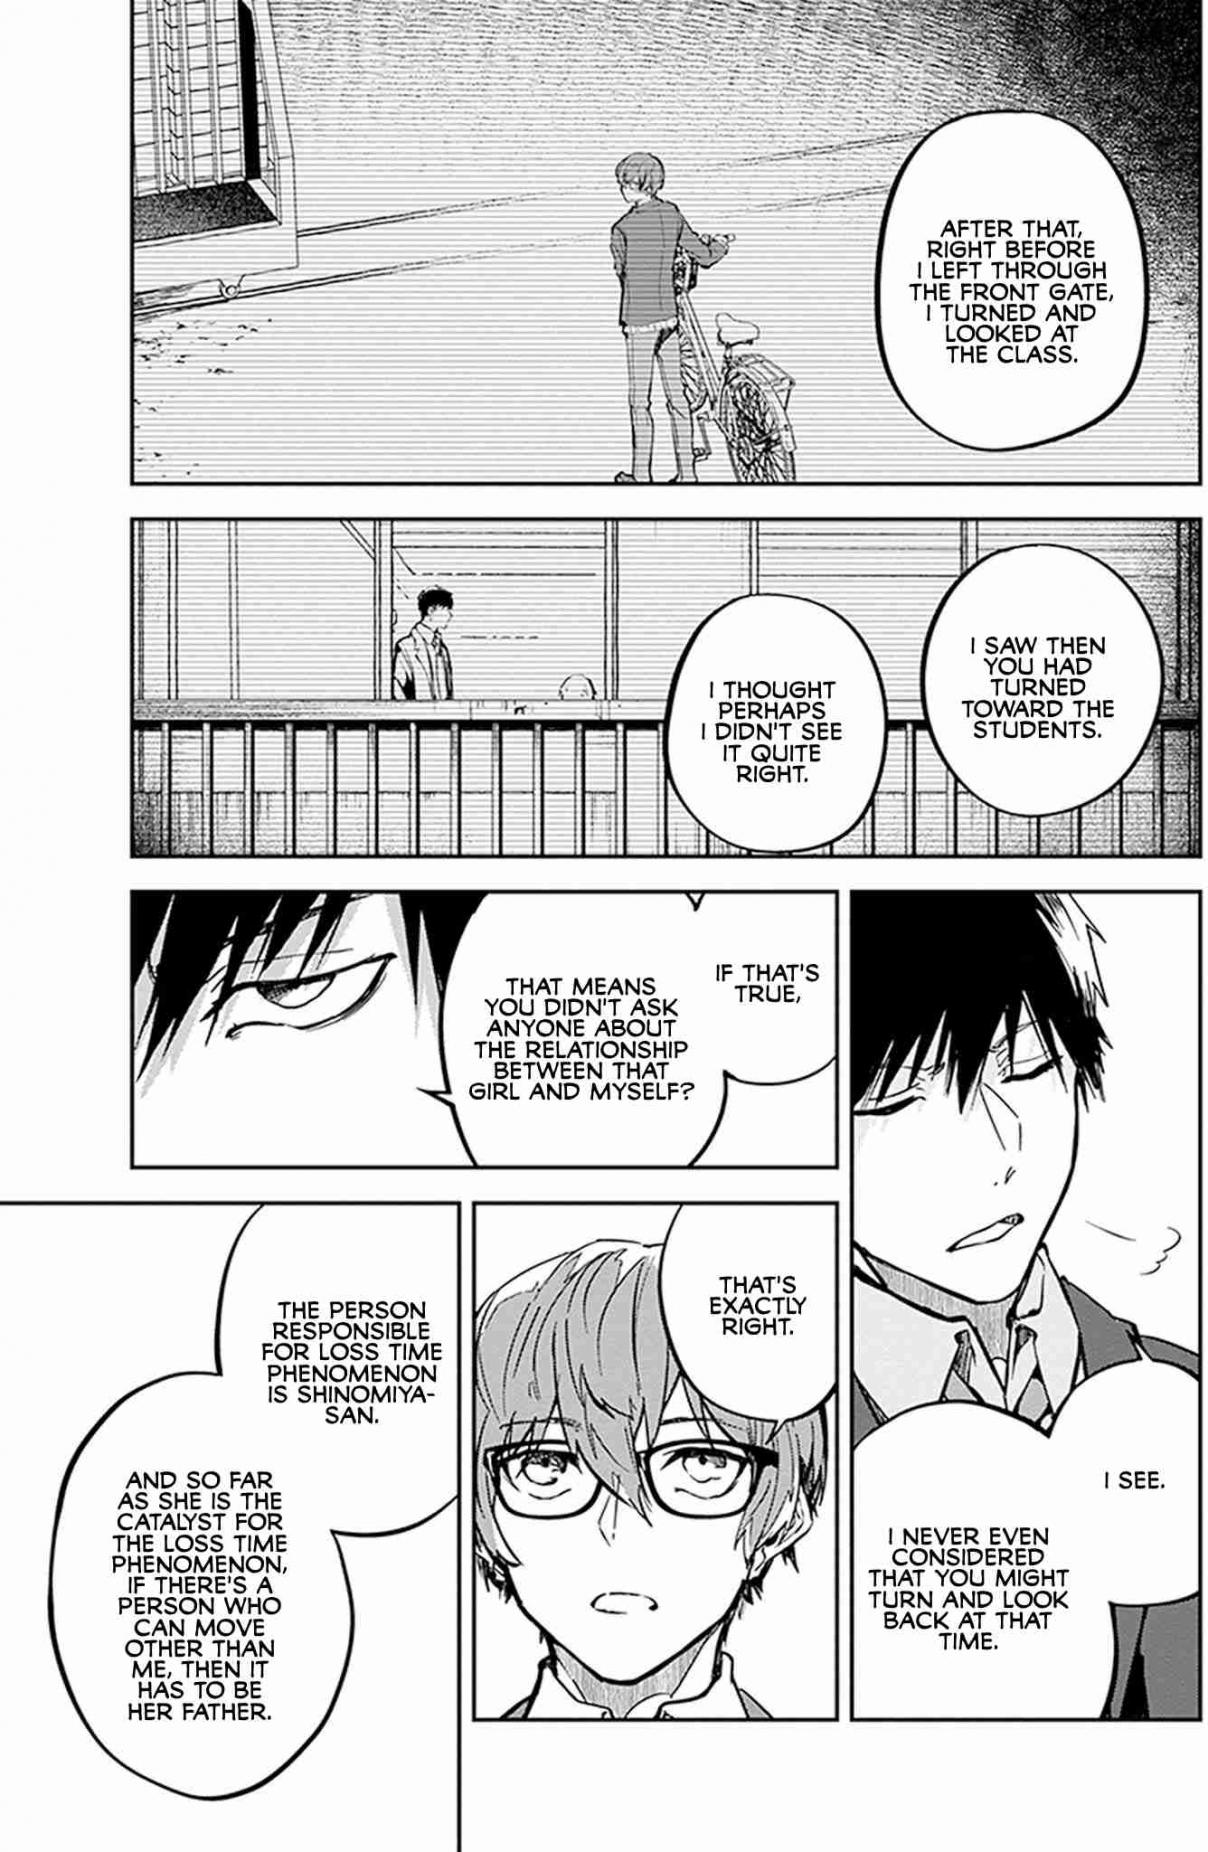 Hatsukoi Losstime Vol. 2 Ch. 8 I Hear the Ticking of Time, Part 2